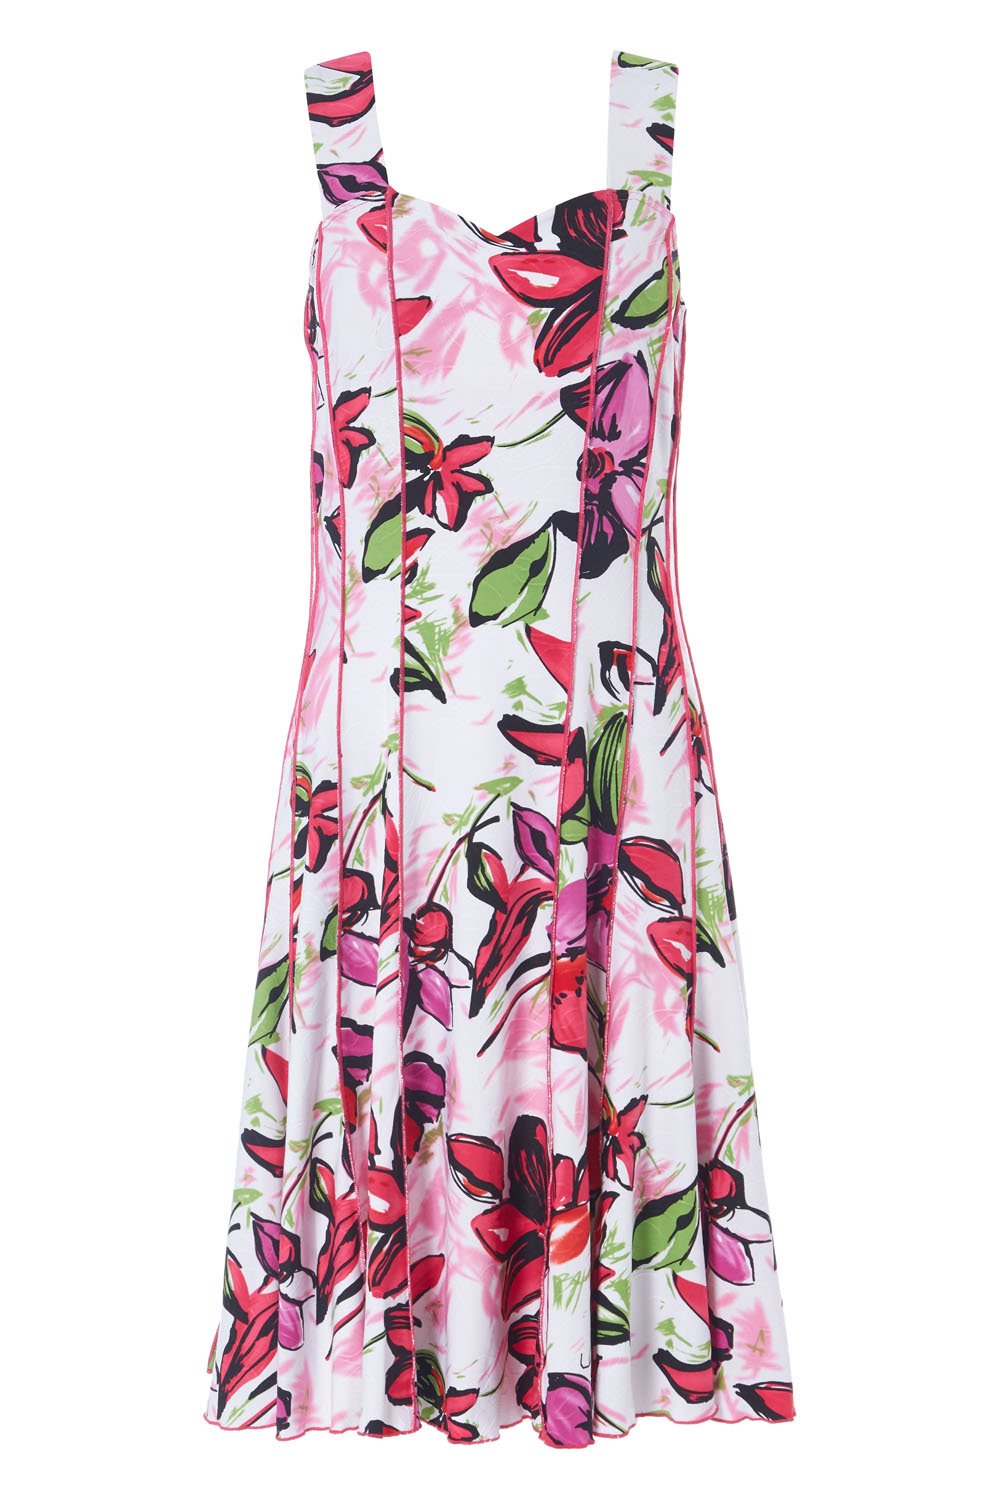 PINK Floral Print Panel Fit and Flare Dress, Image 4 of 4